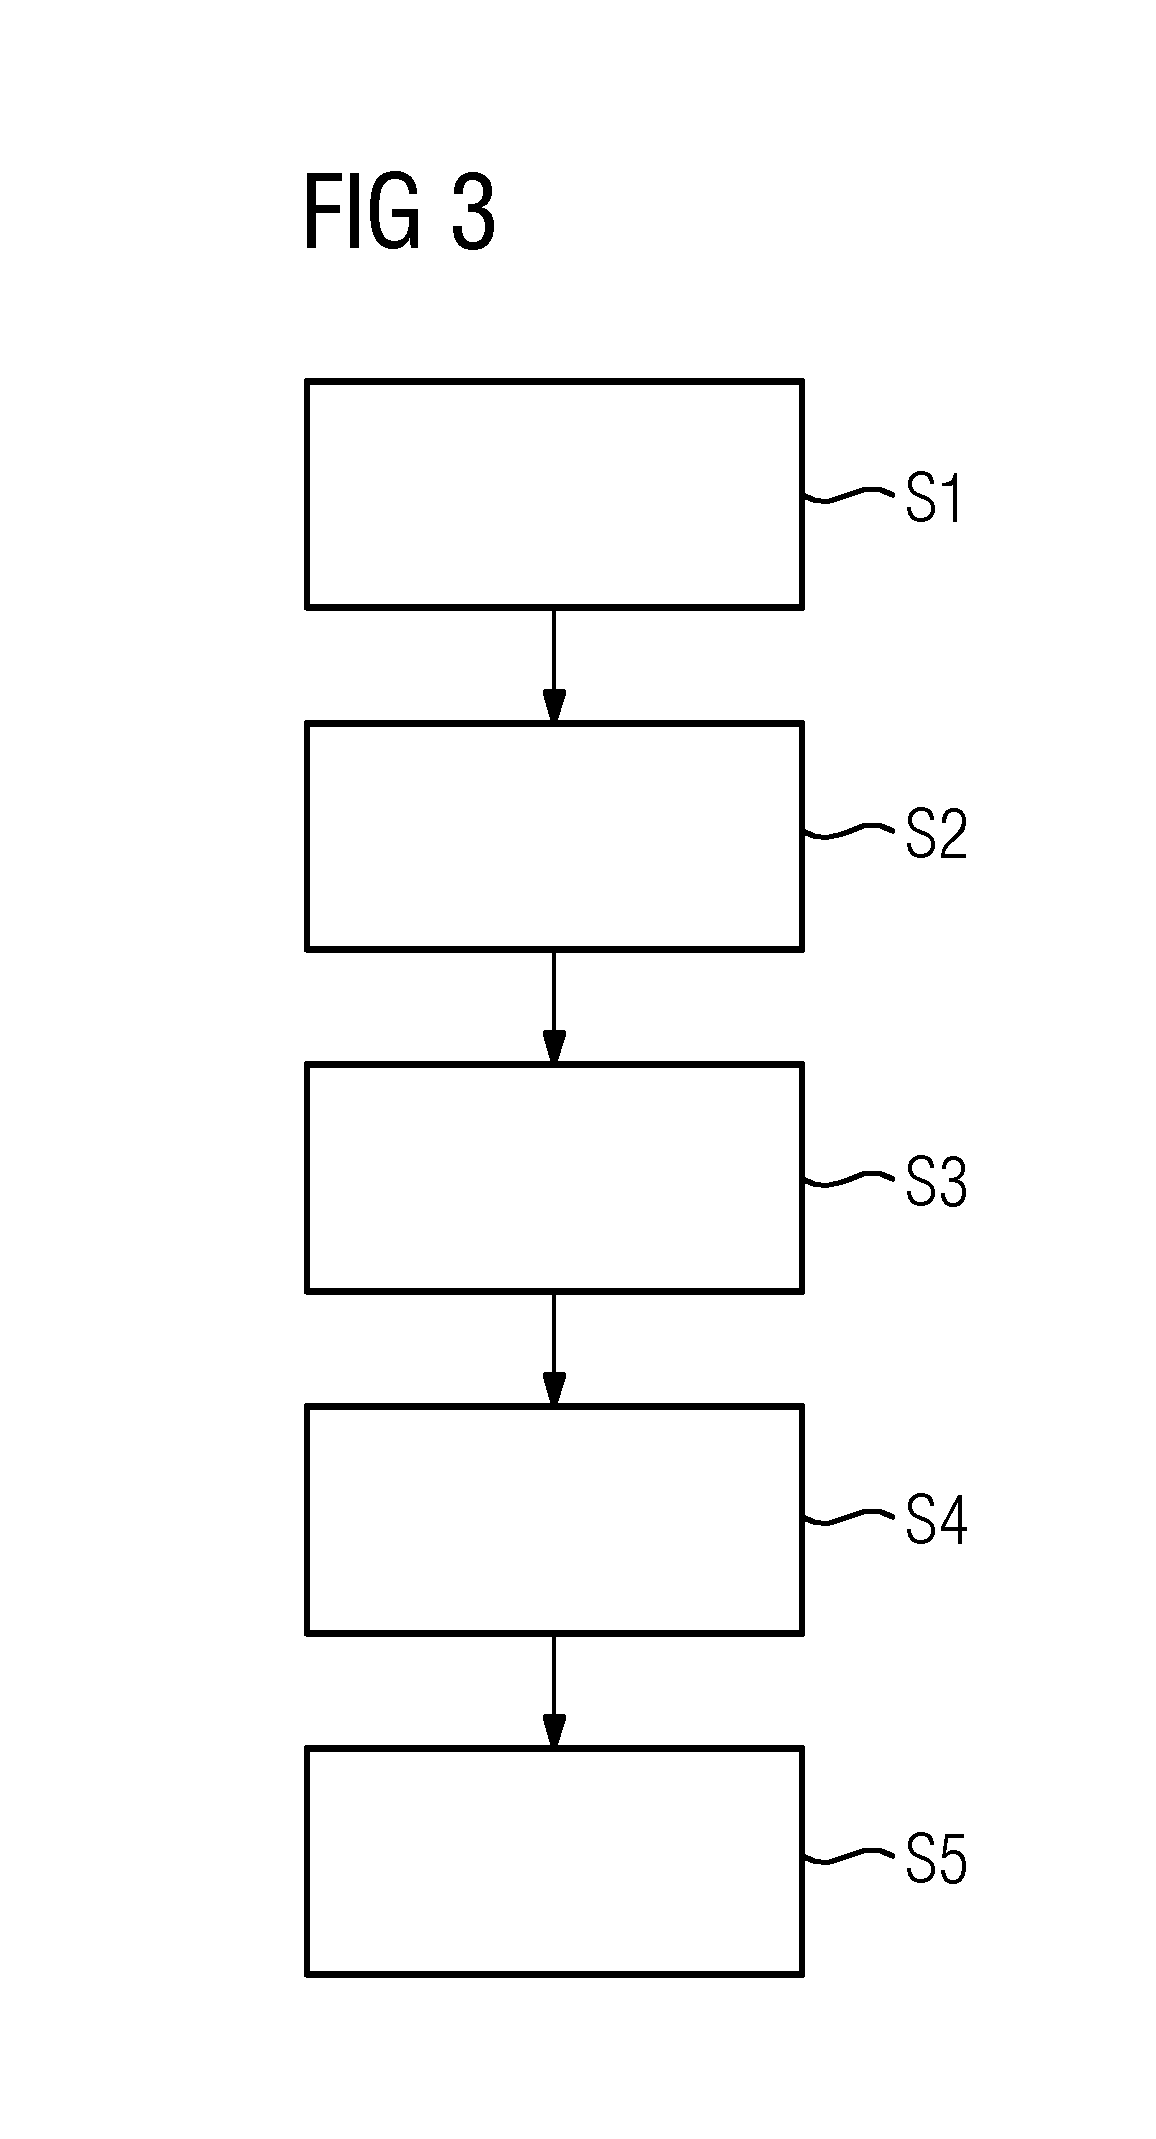 Method for analyzing a physical system architecture of a safety-critical system